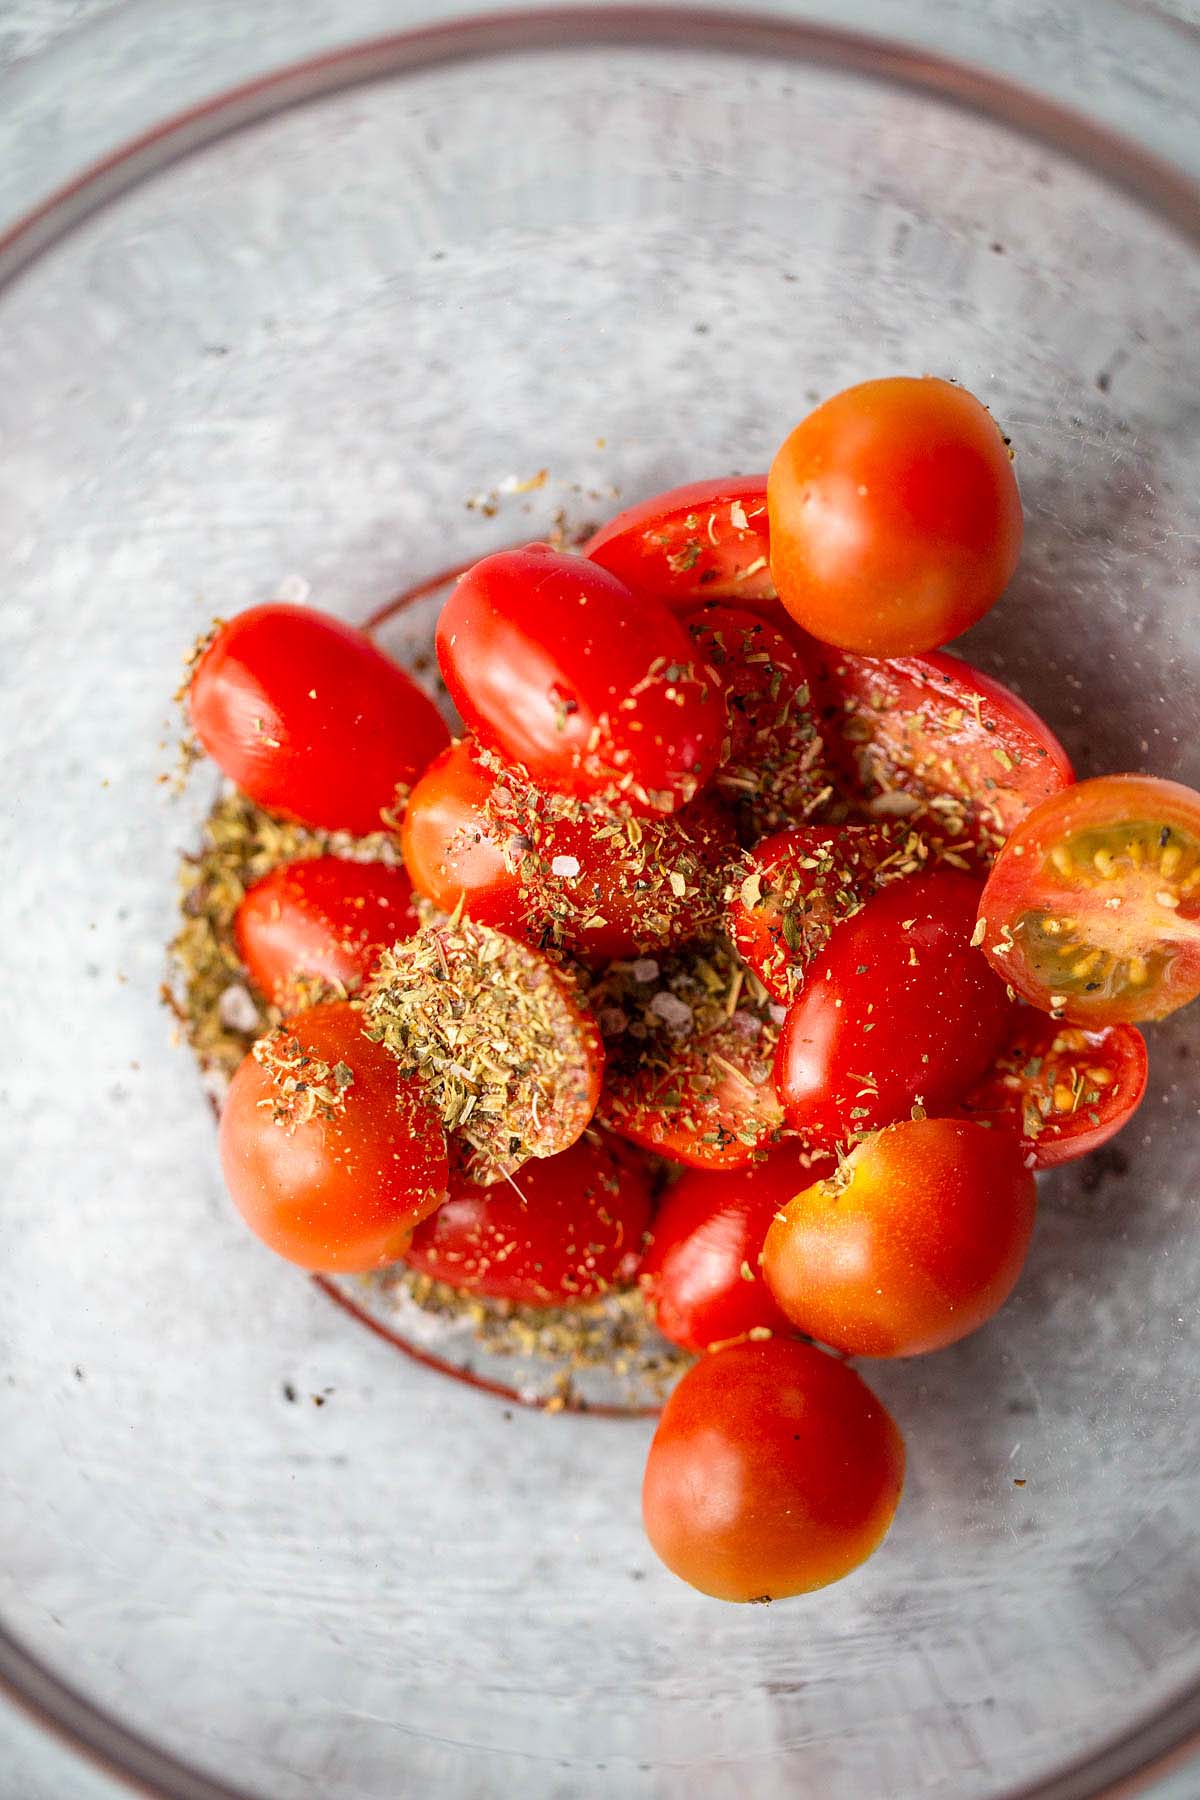 Tomatoes in a bowl.